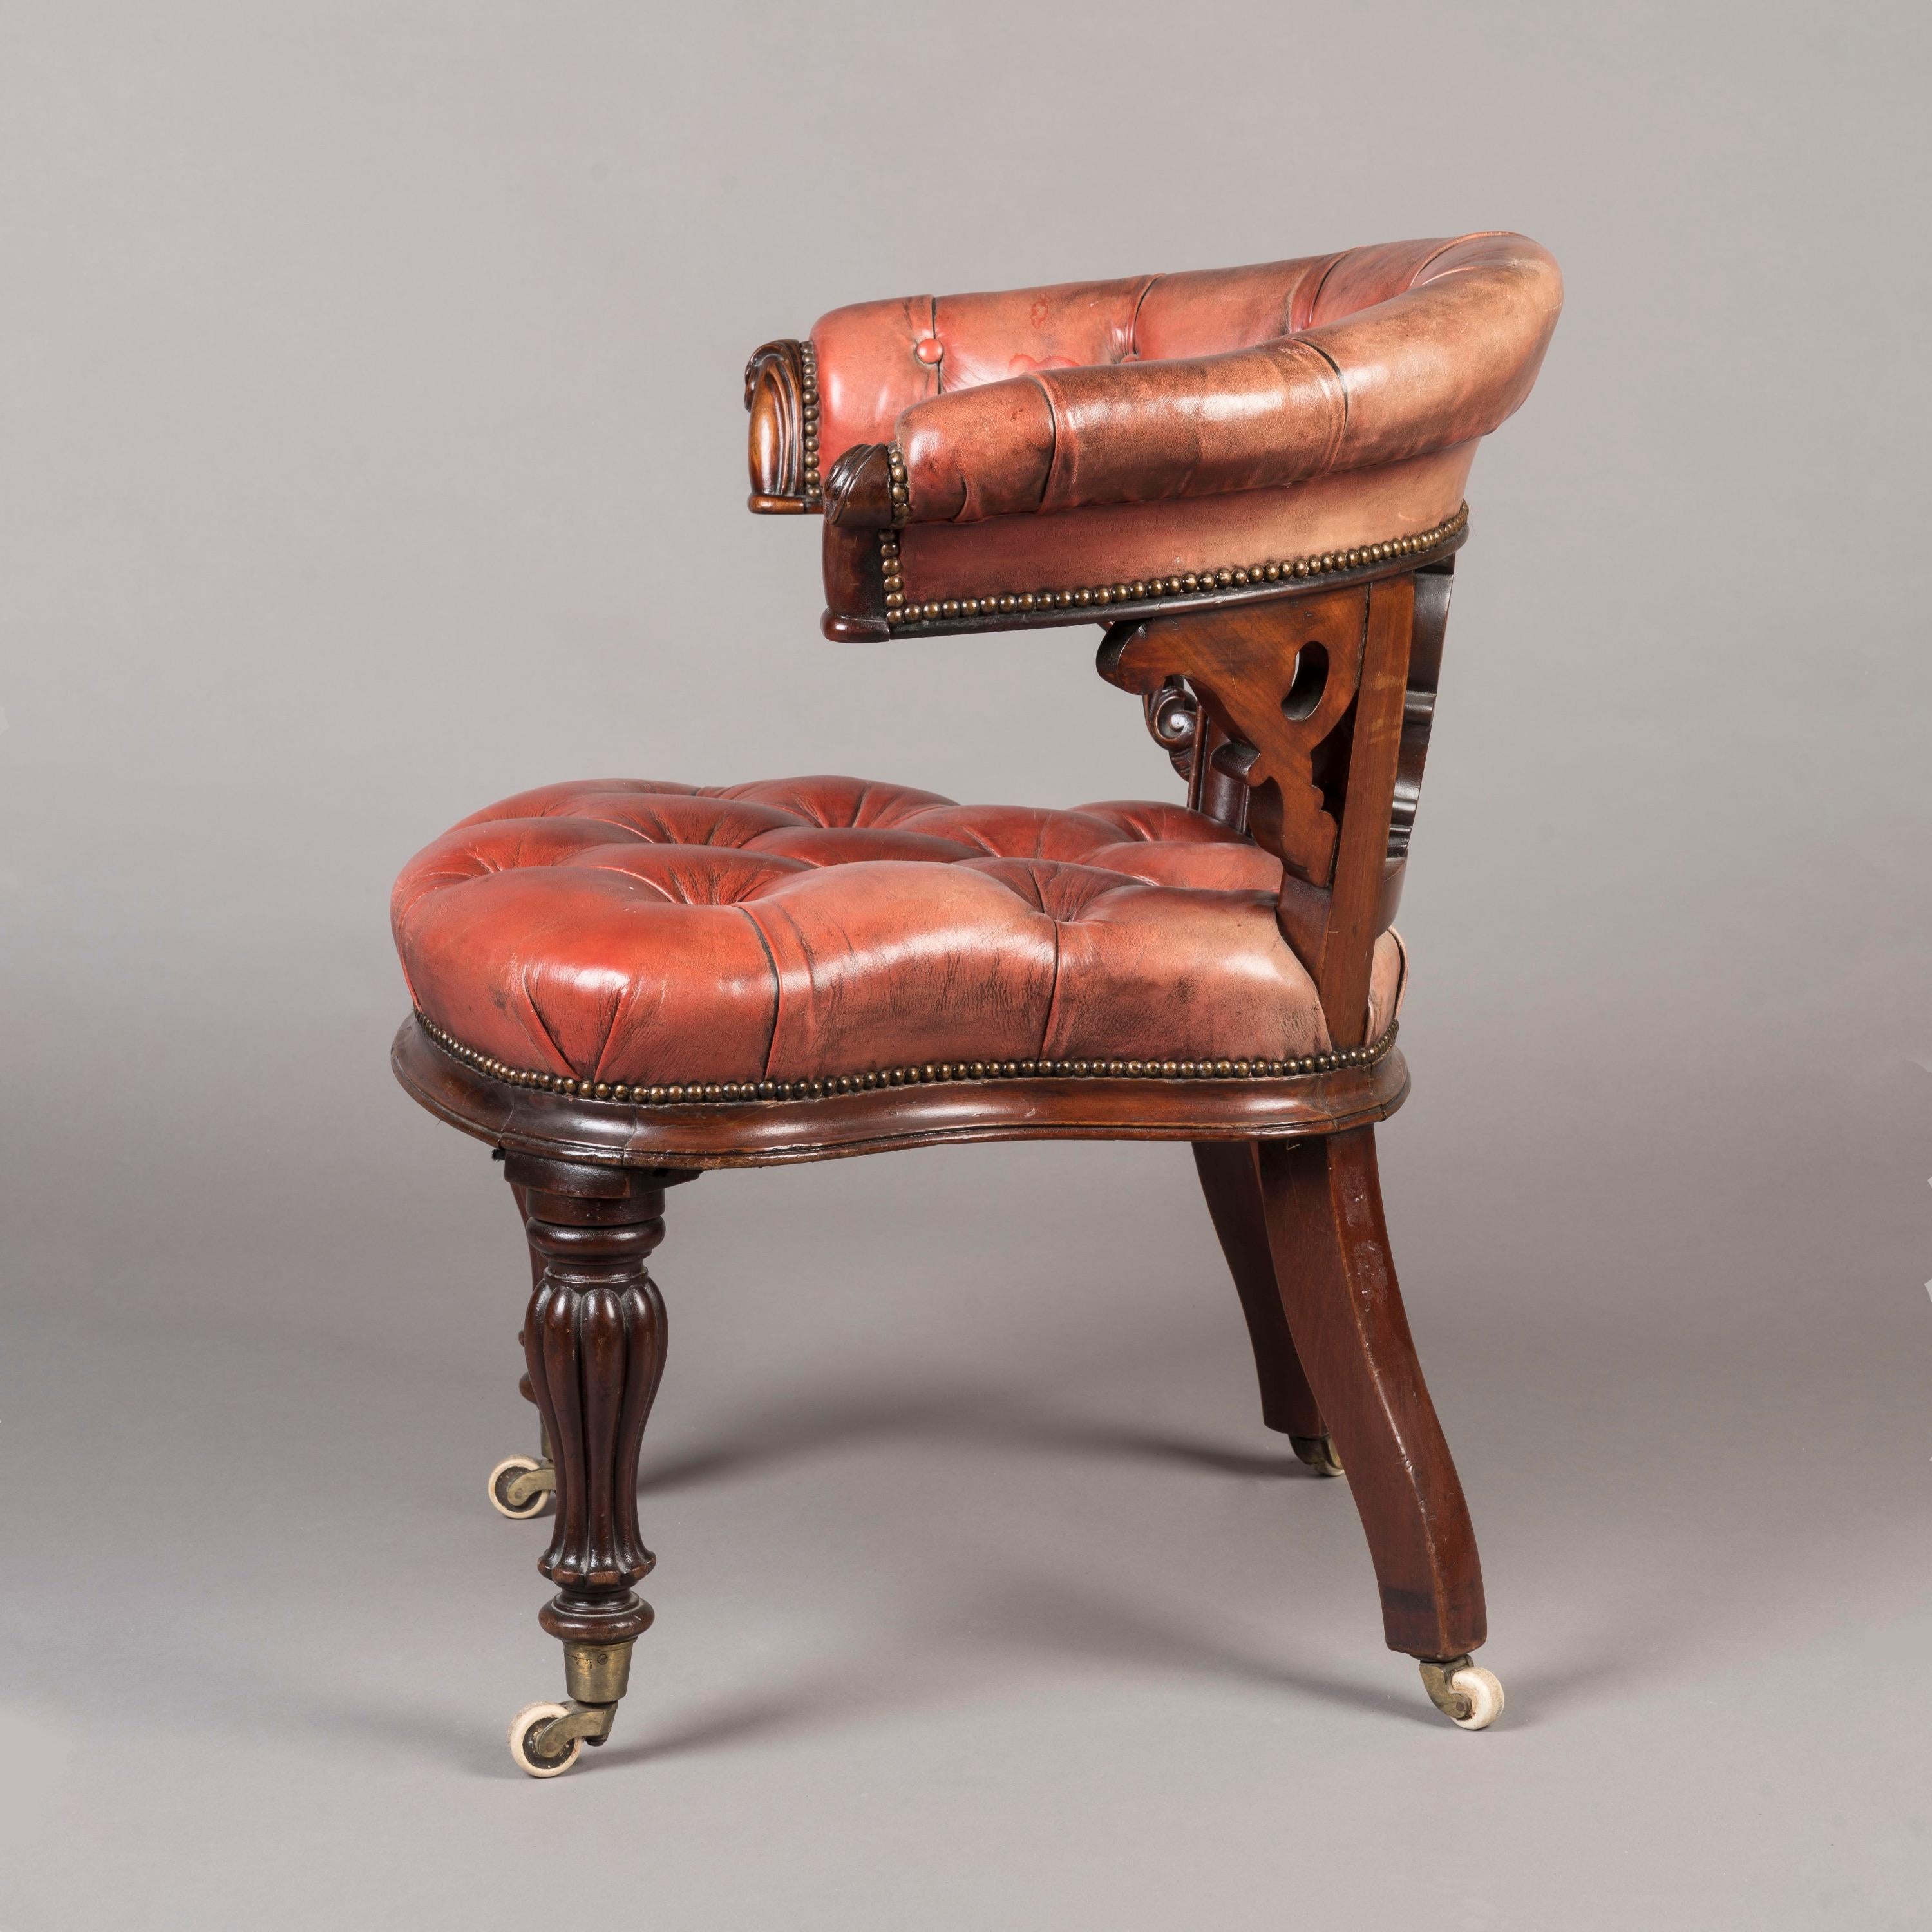 English Mid-19th Century Carved Mahogany Desk Chair with Red Leather Upholstery For Sale